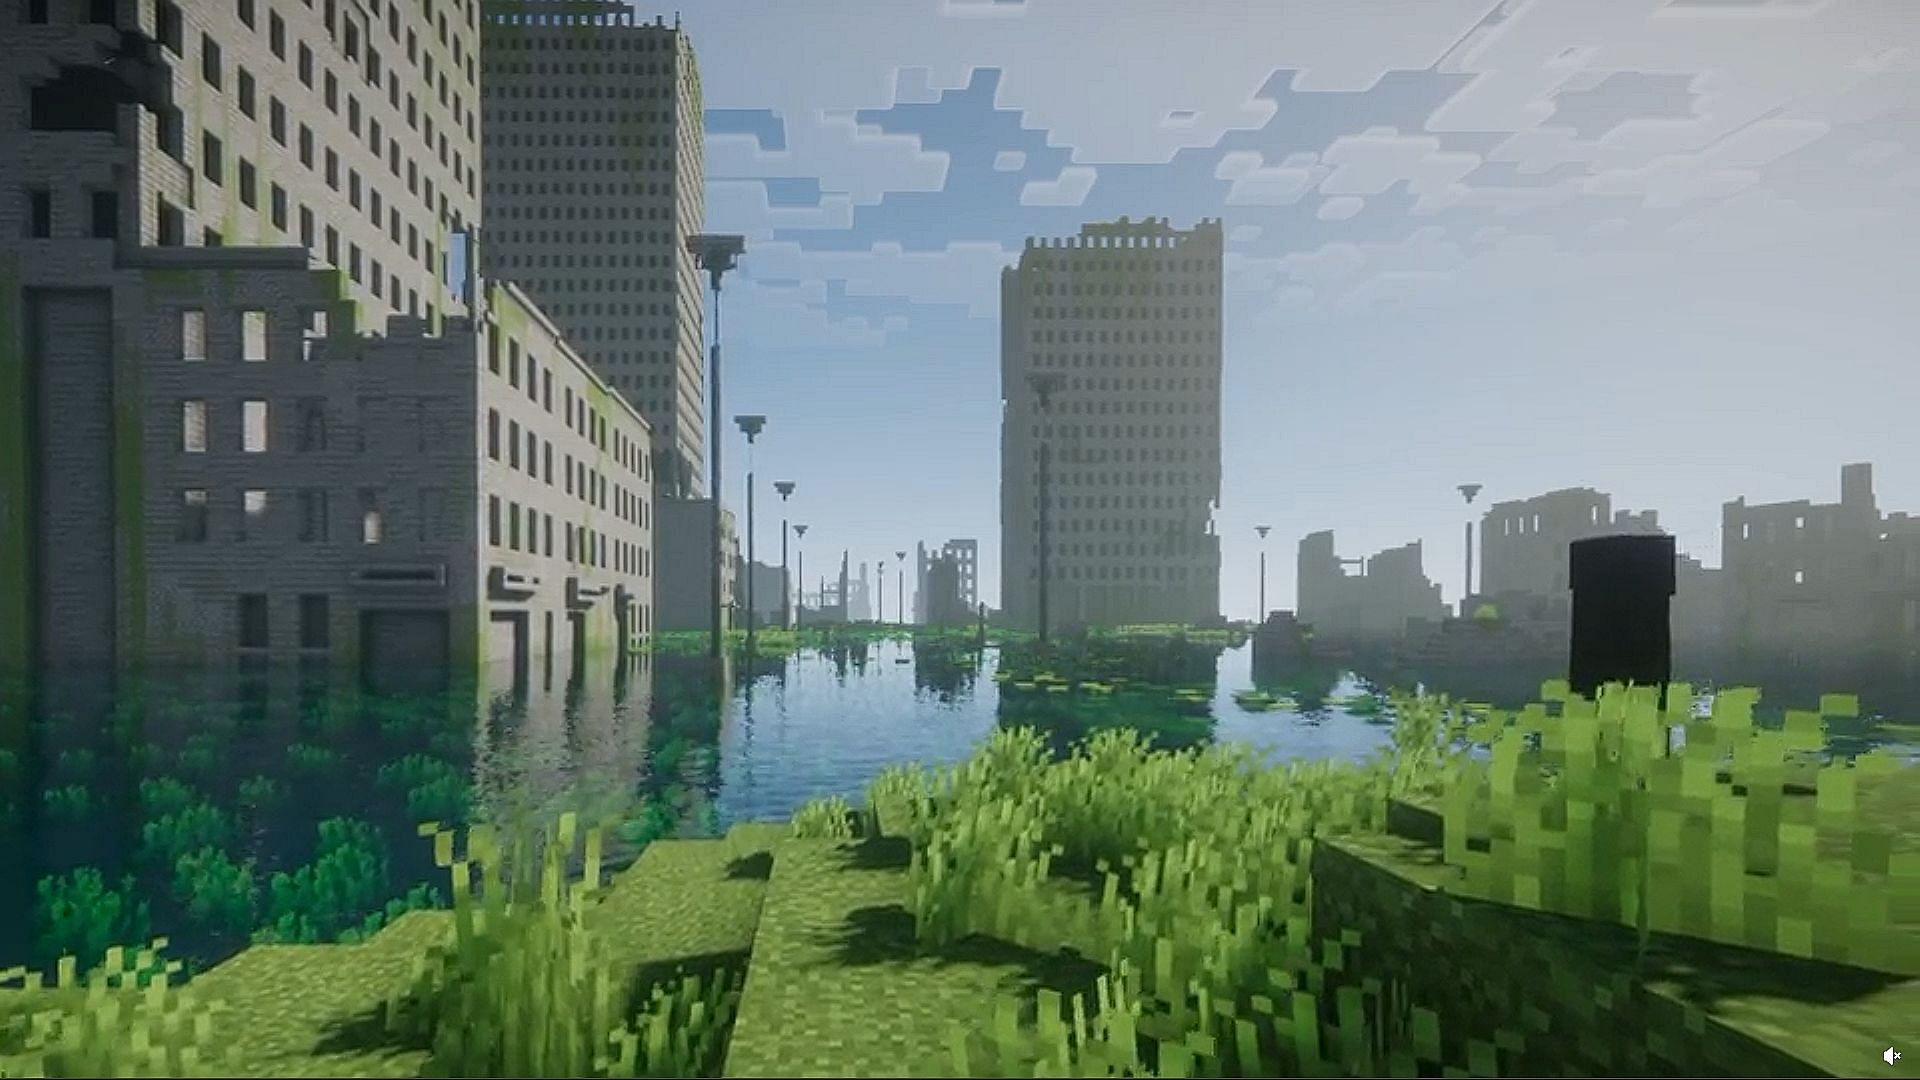 minecraft abandoned city hunger games map